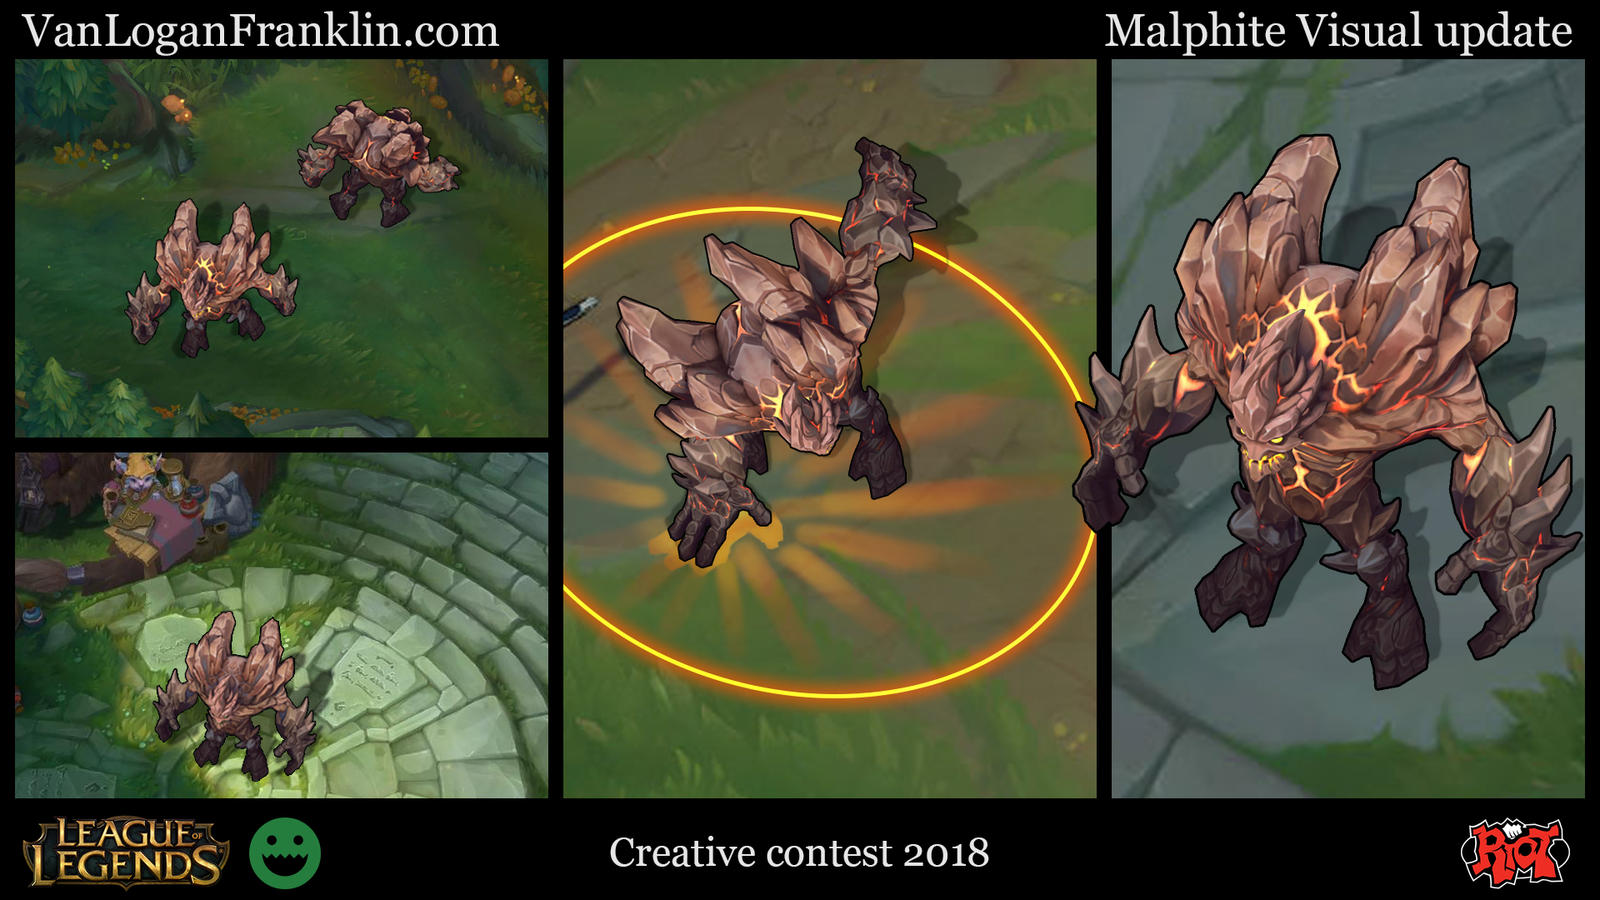 What Malphite COULD Look Like - League of Legends 